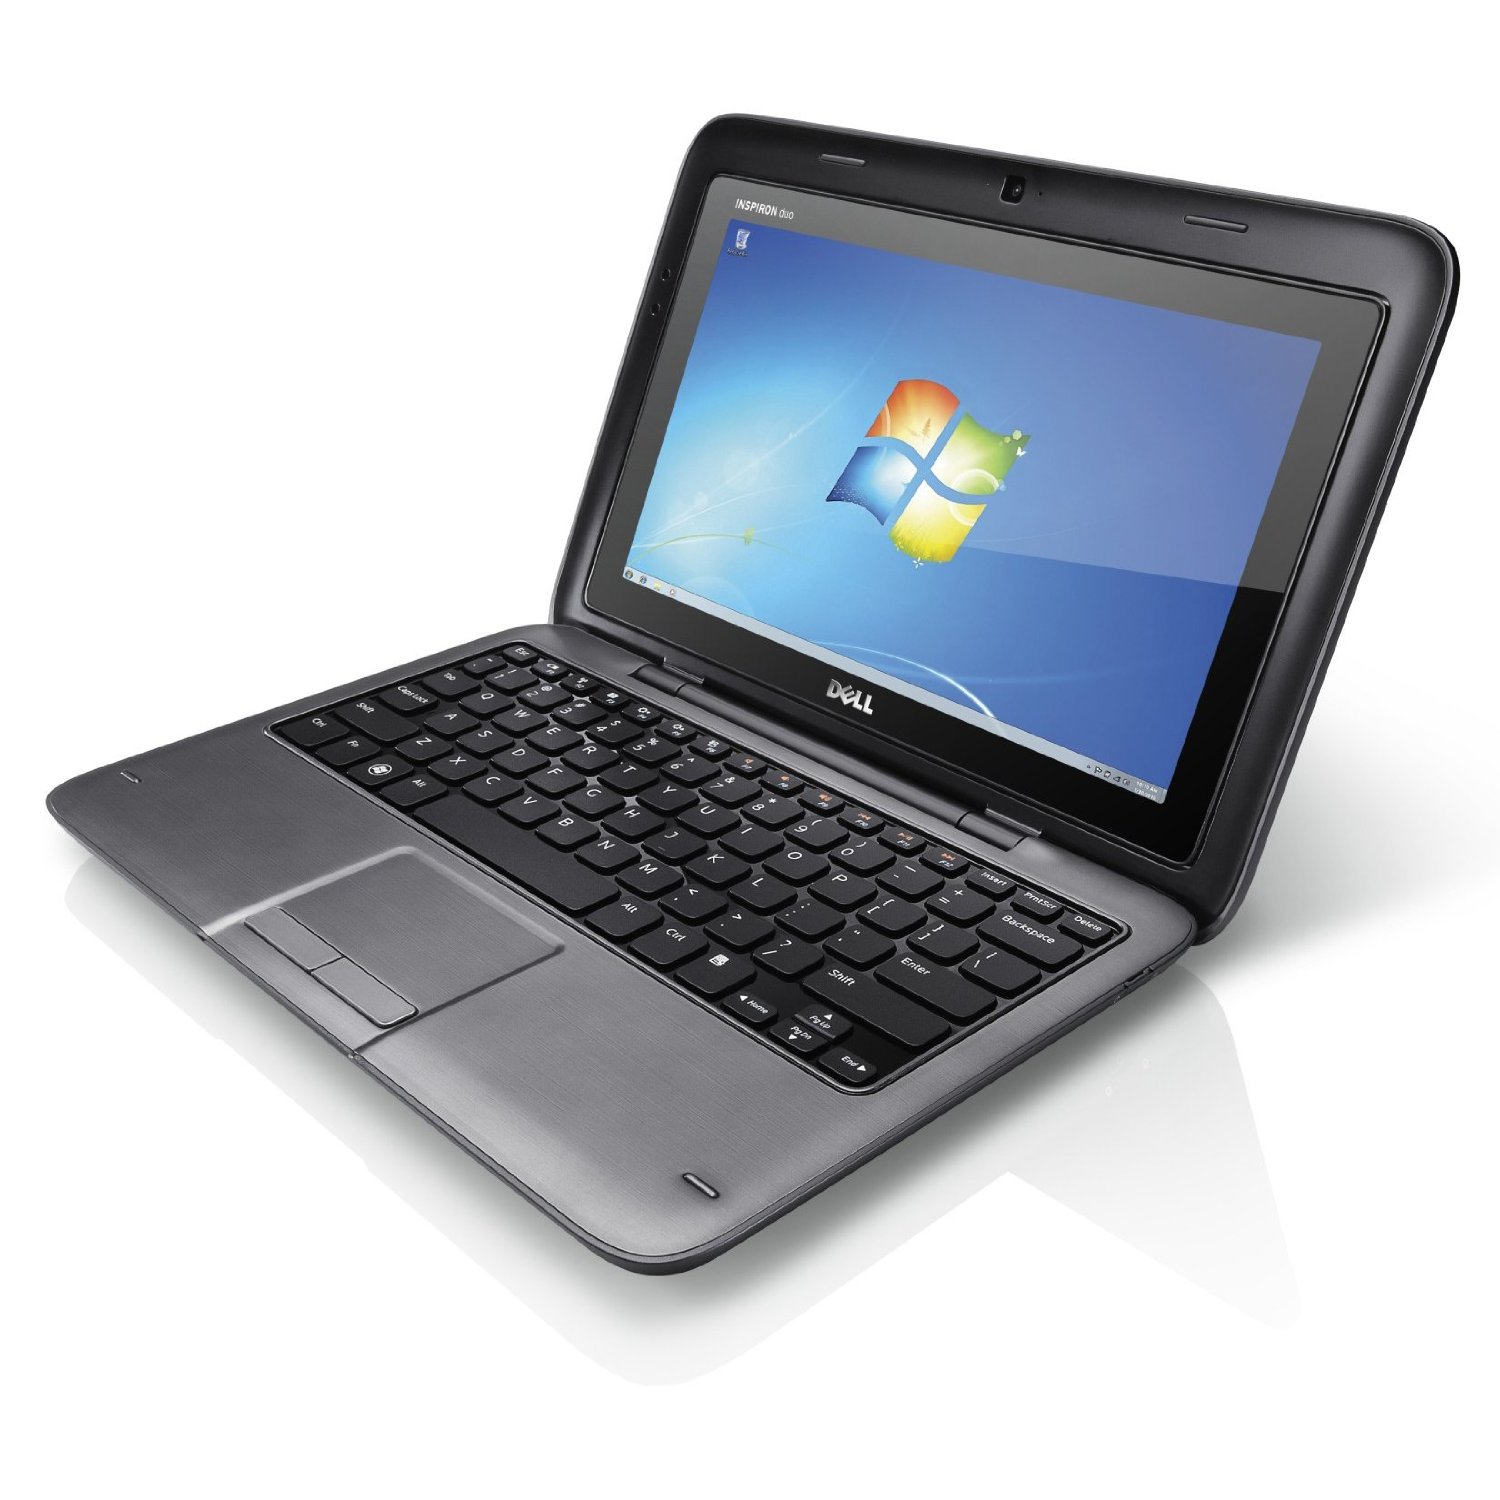 http://thetechjournal.com/wp-content/uploads/images/1109/1316252230-dell-inspiron-duo-id4495fnt-convertible-tabletlaptop--4.jpg